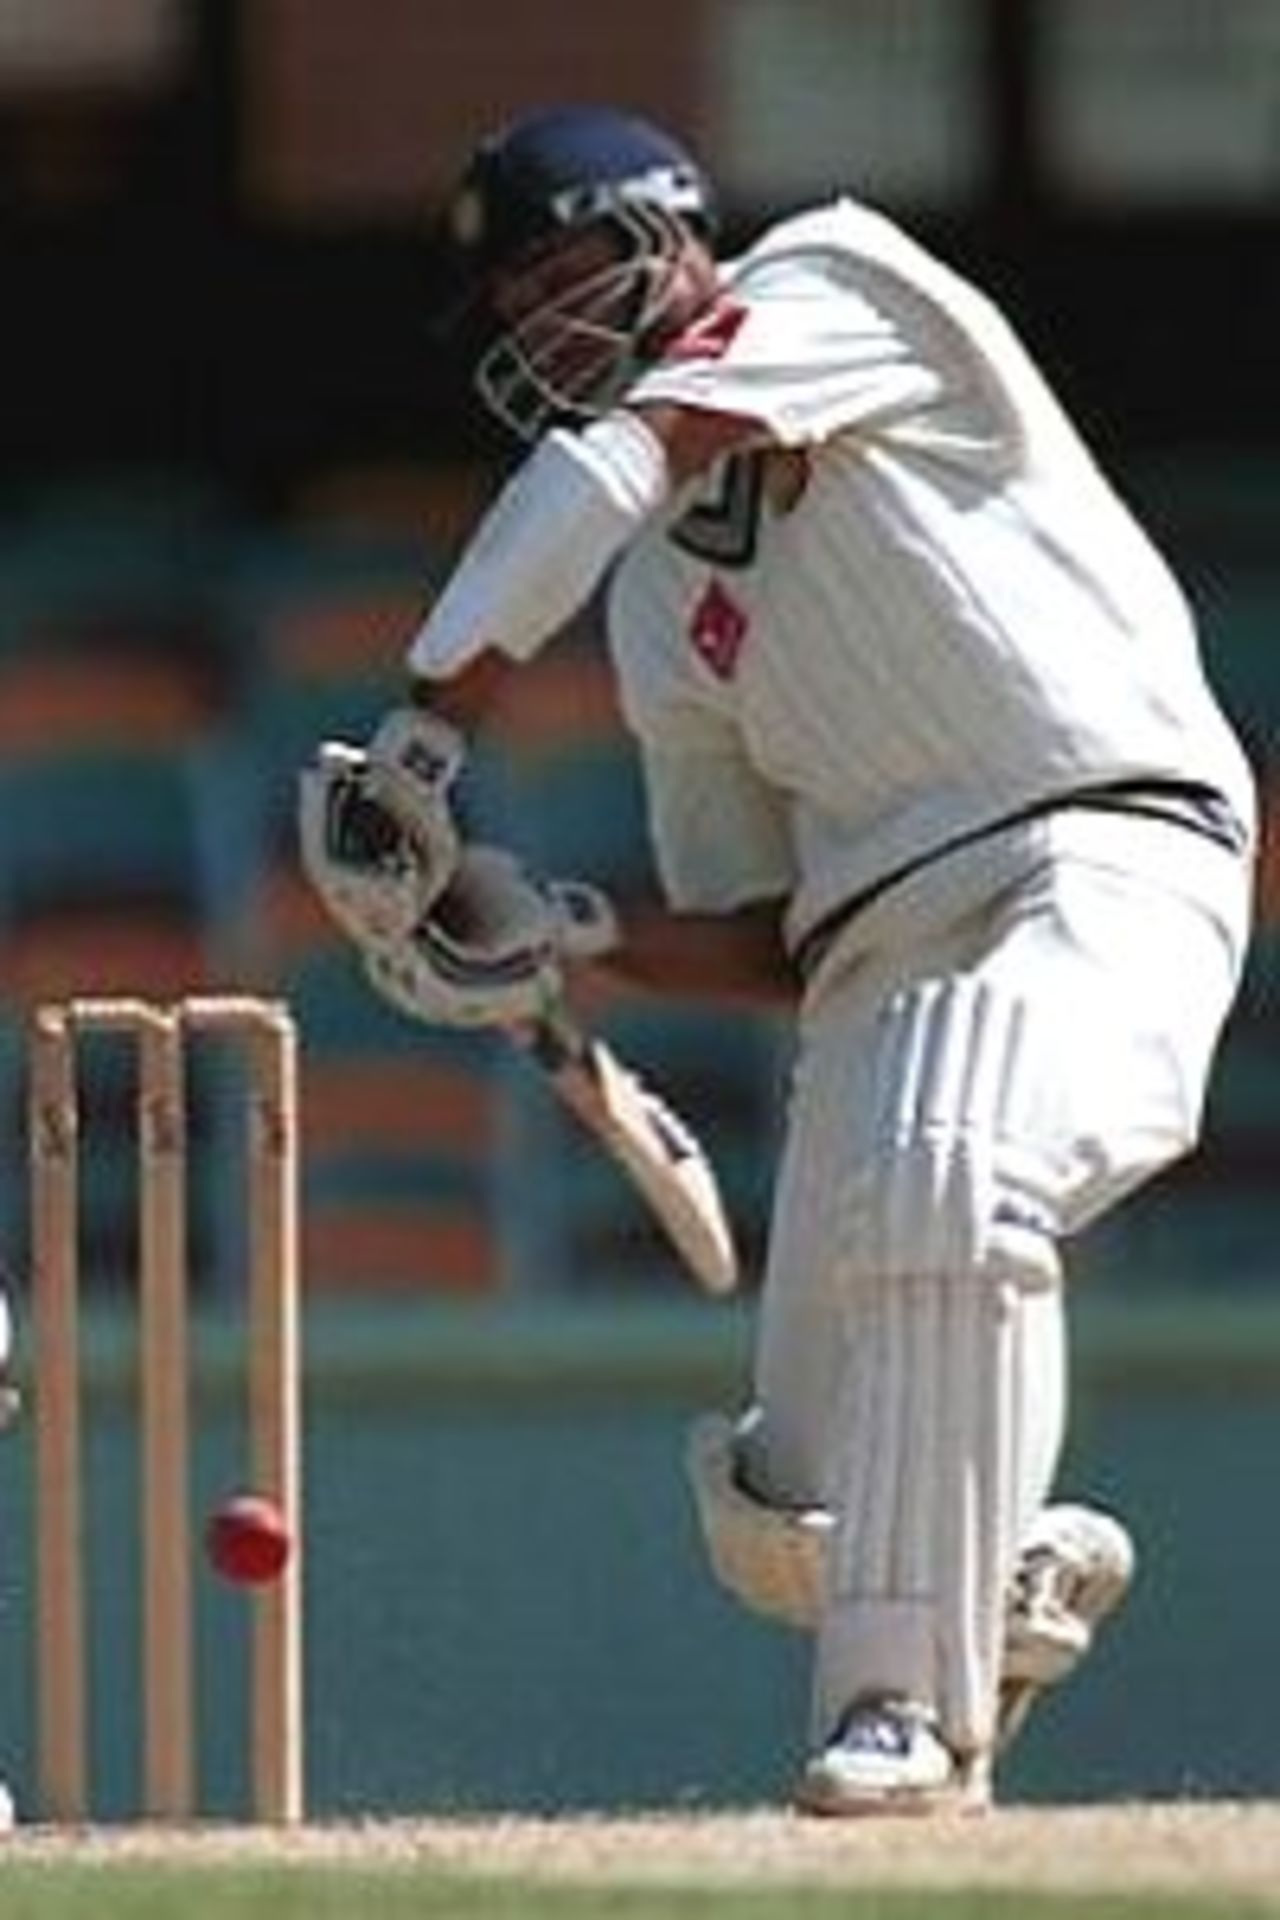 28 Nov 1999: VVS Laxman of India in action during the game against Queensland at the Gabba Cricket Ground in Brisbane.